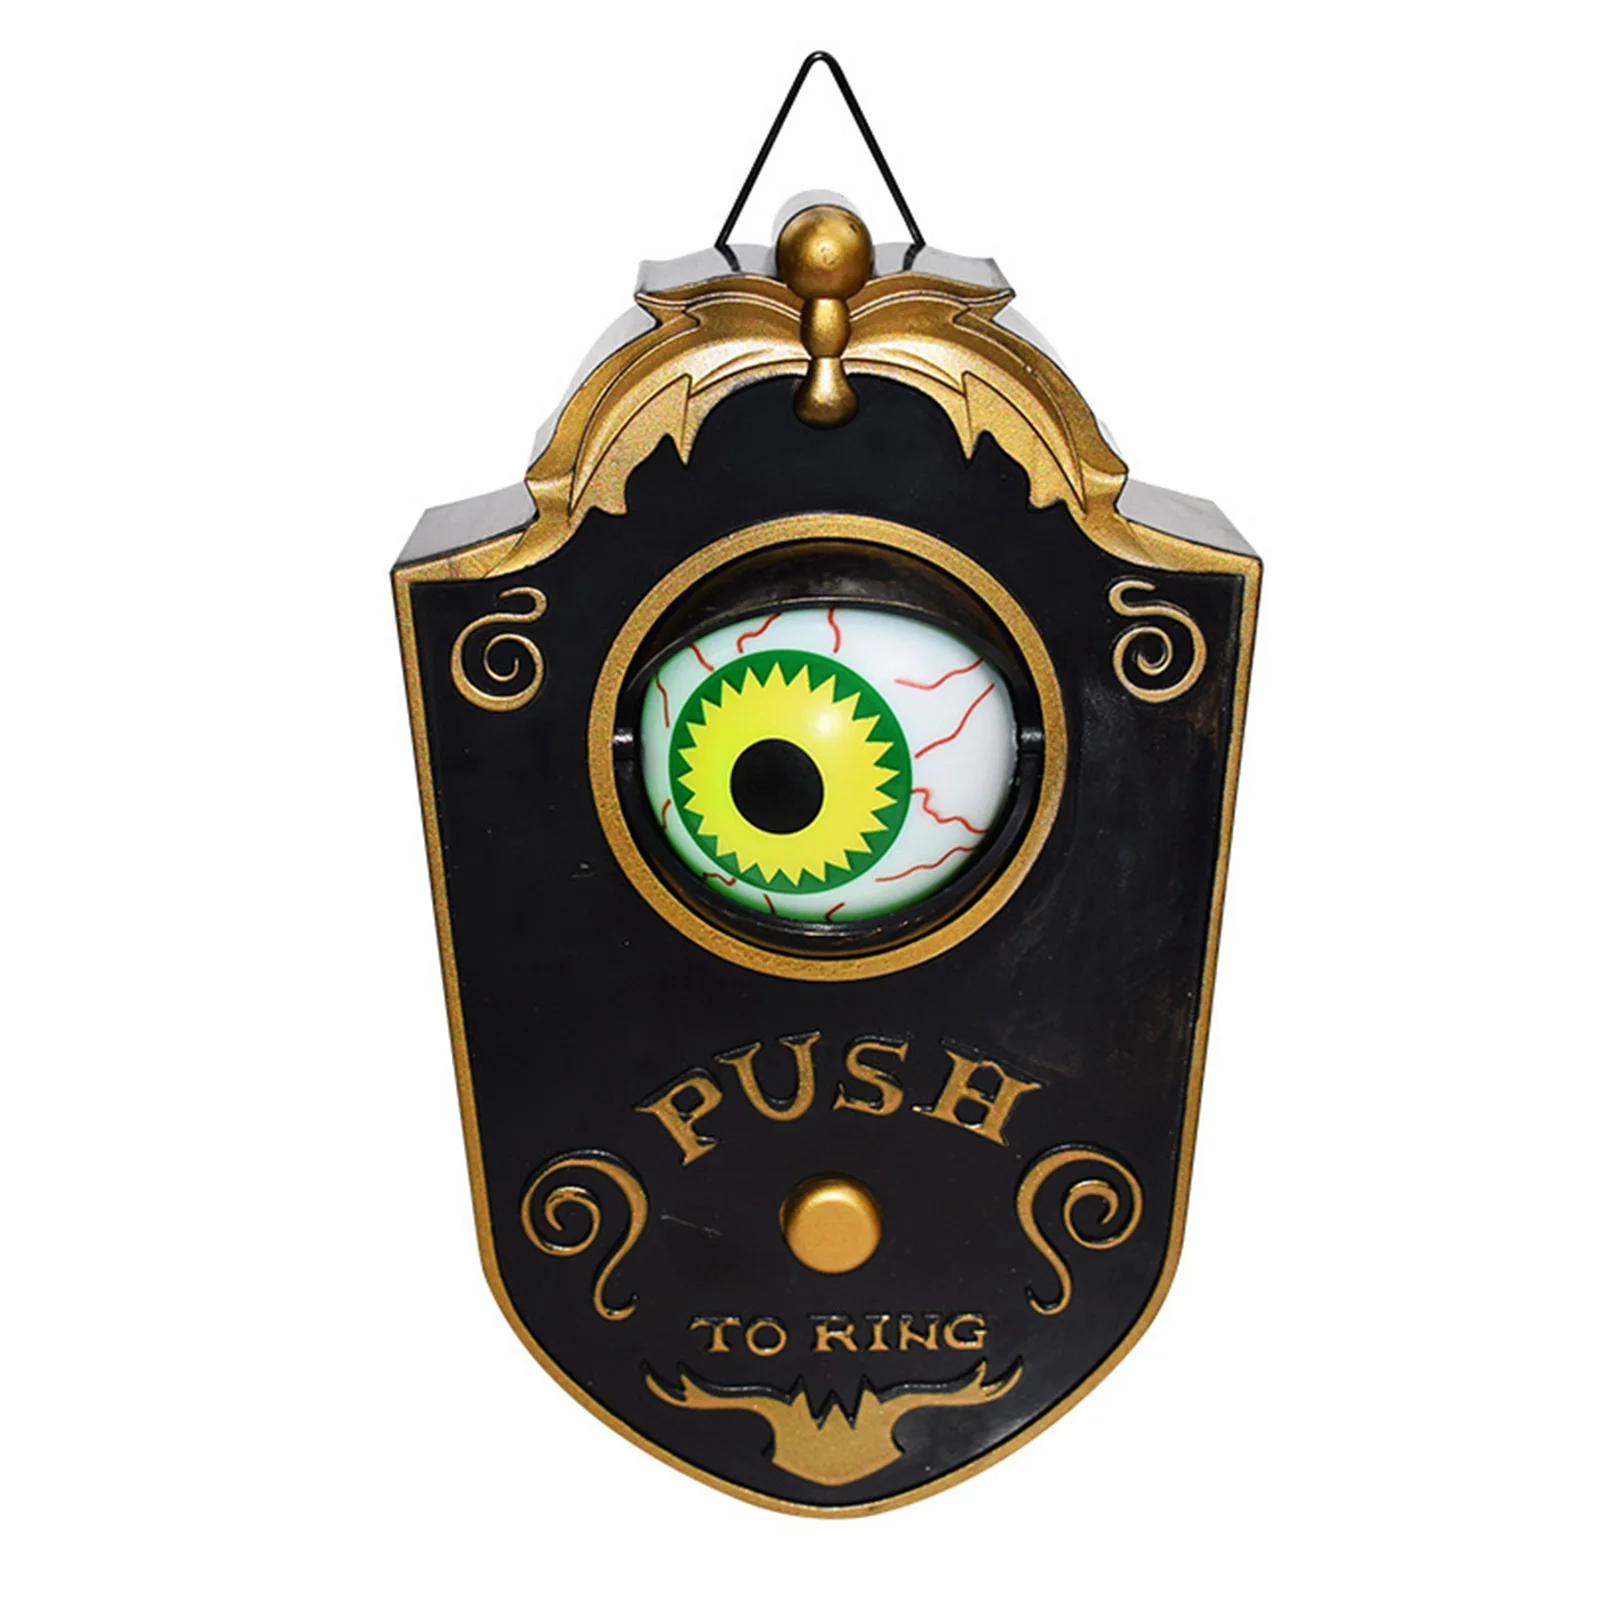 

Eyeball Doorbell with Spooky Sounds Glow in the Dark Animated One-Eyed Doorbell Haunted House Scary Prop Halloween Decoration